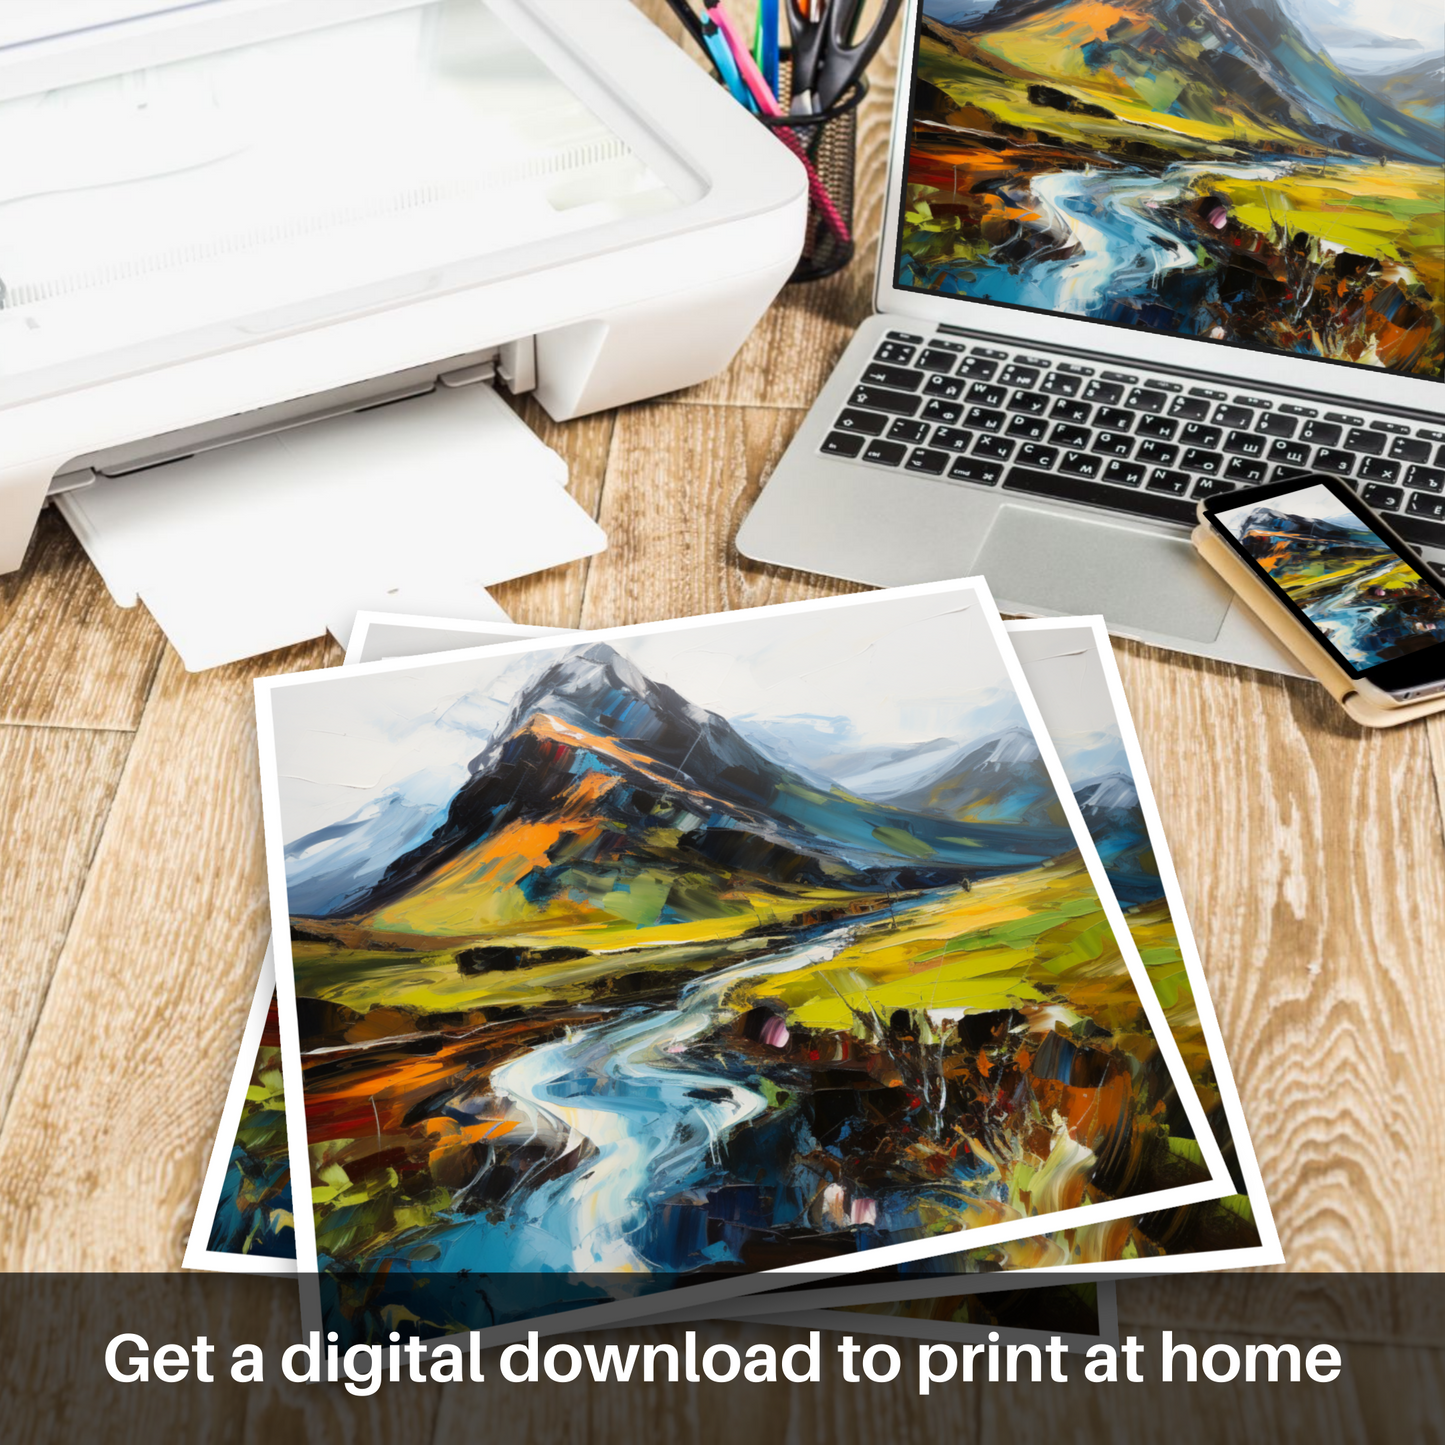 Downloadable and printable picture of Beinn Ghlas